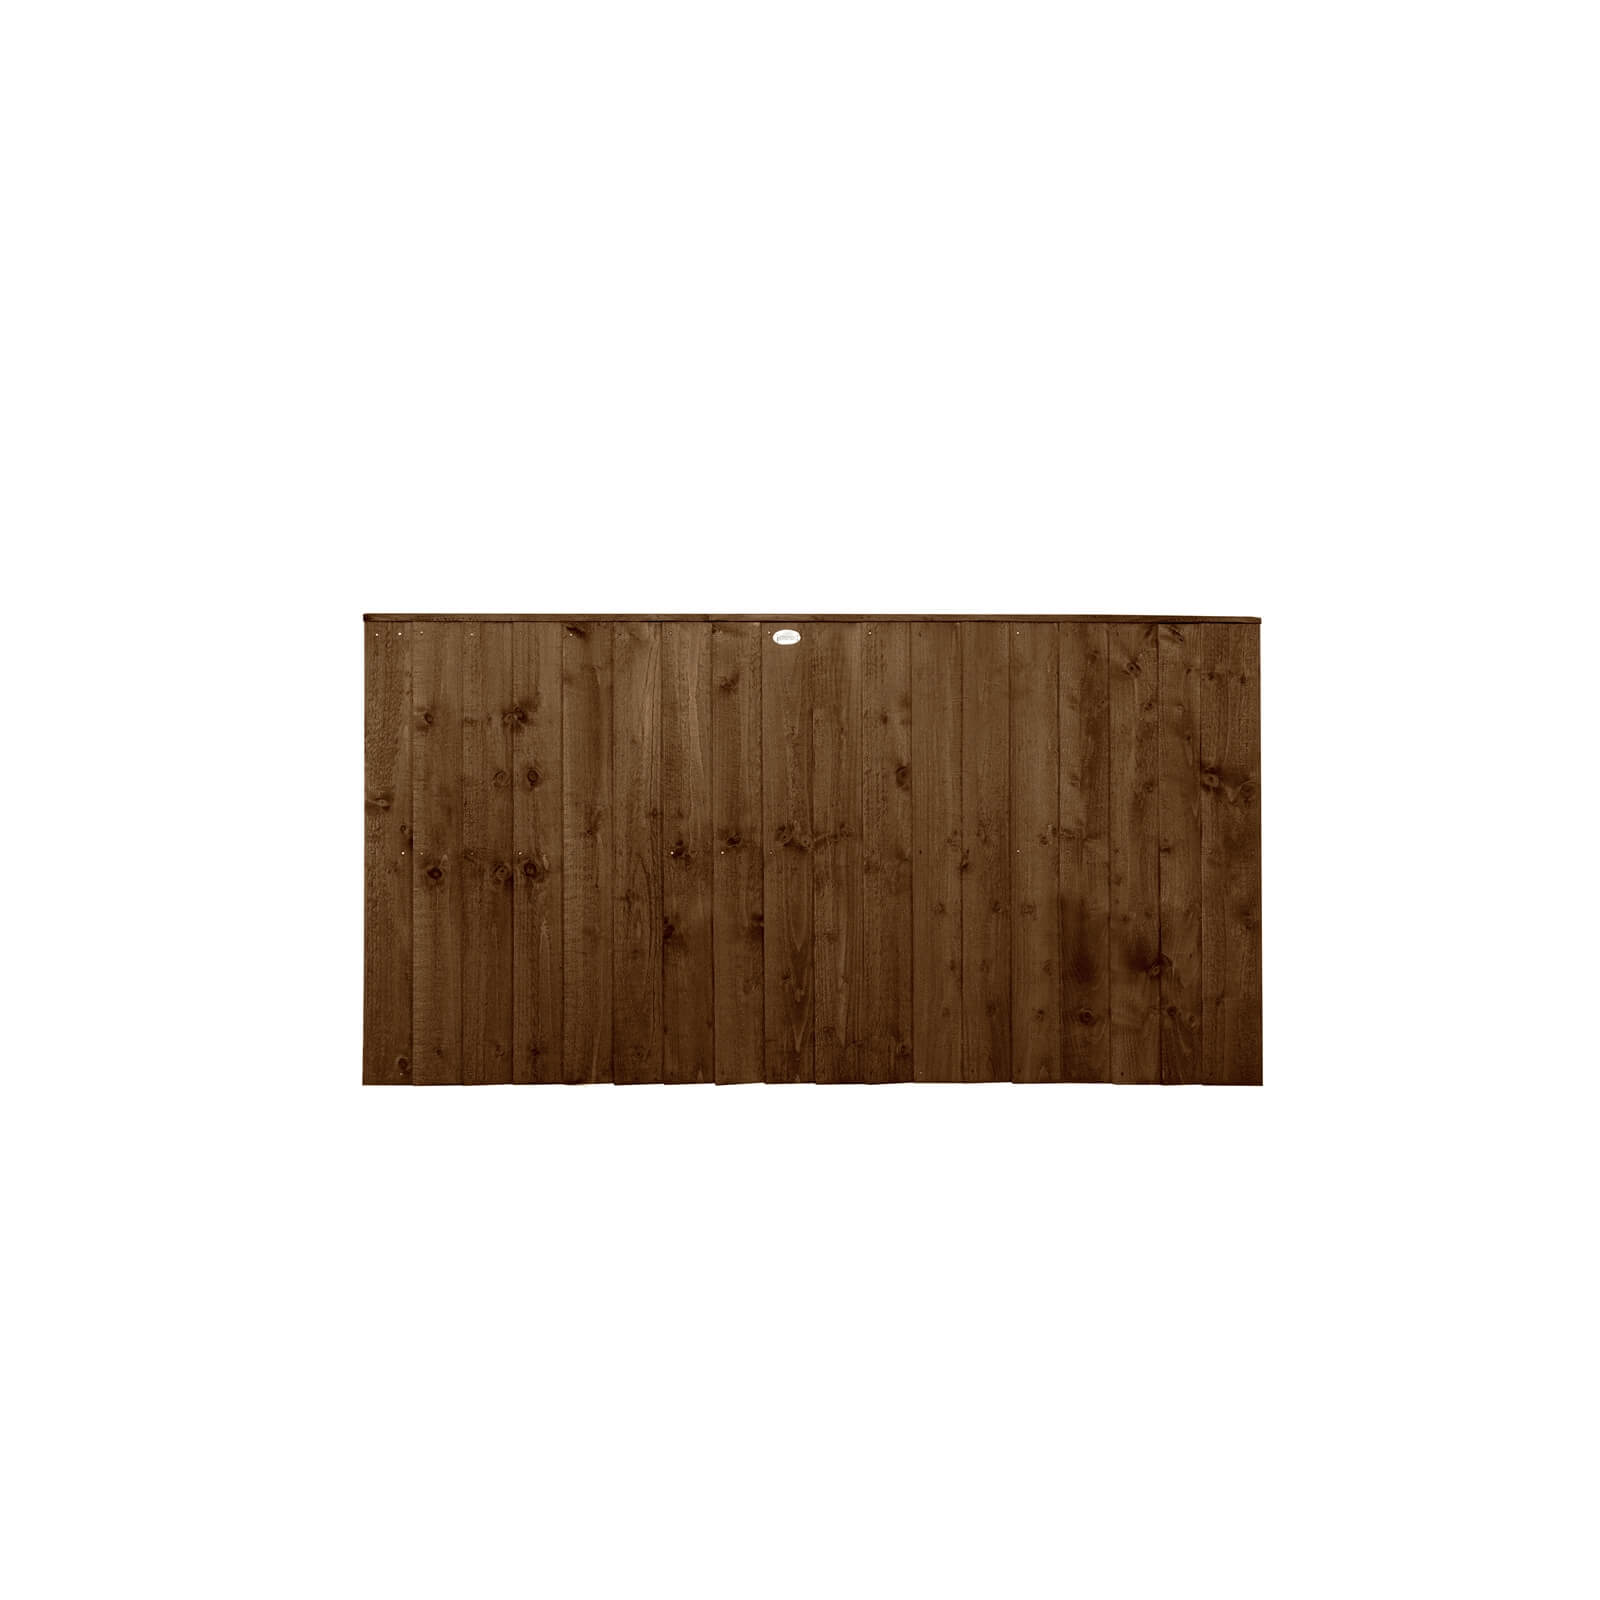 6ft x 3ft (1.83m x 0.93m) Pressure Treated Featheredge Fence Panel (Dark Brown) - Pack of 3